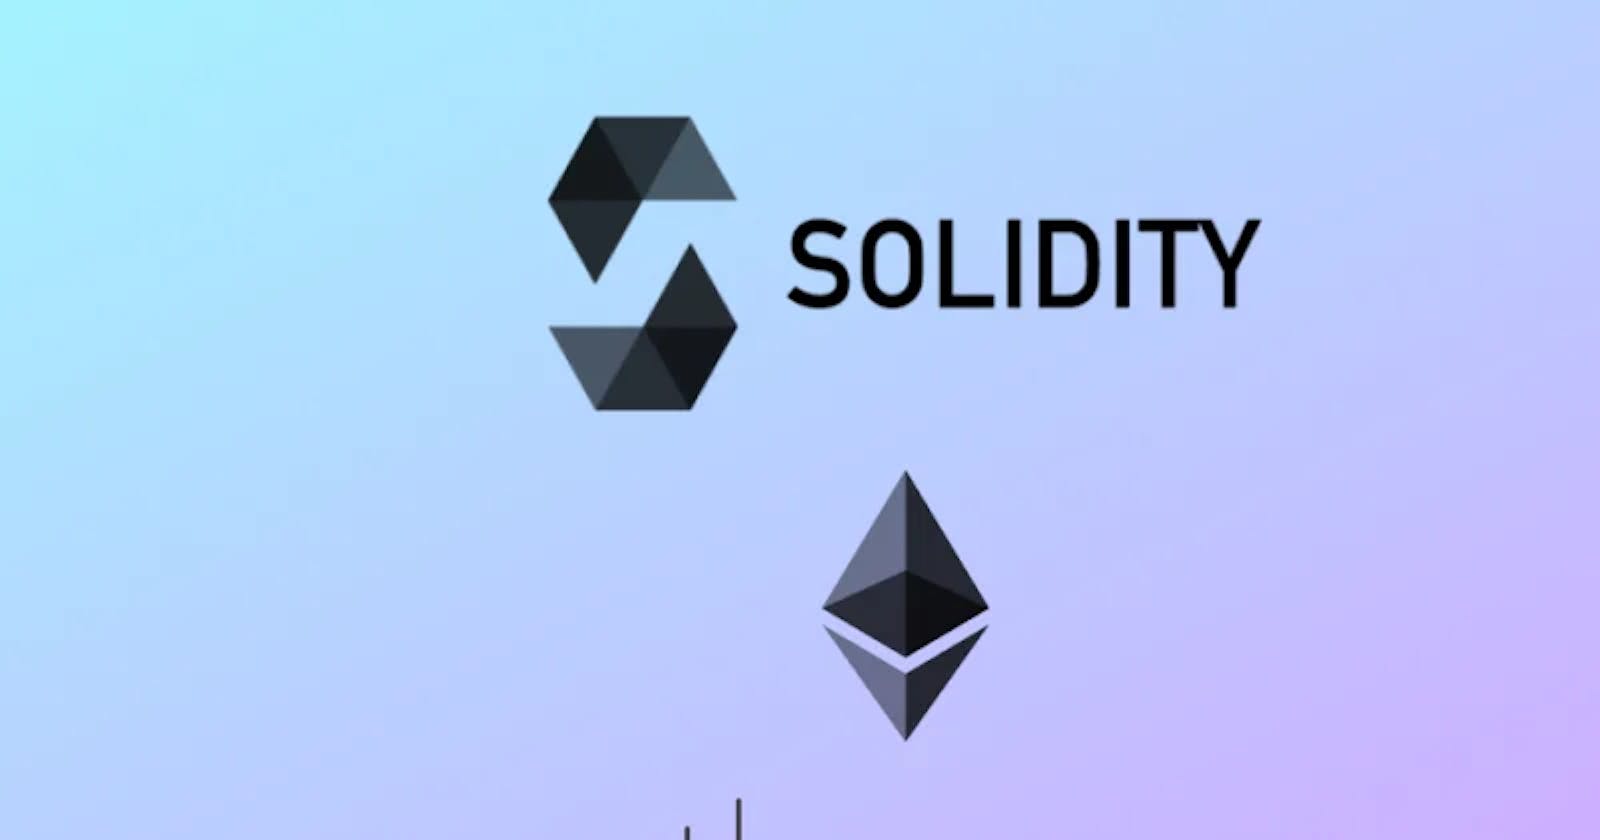 Let's get started with Solidity - Web3 Development